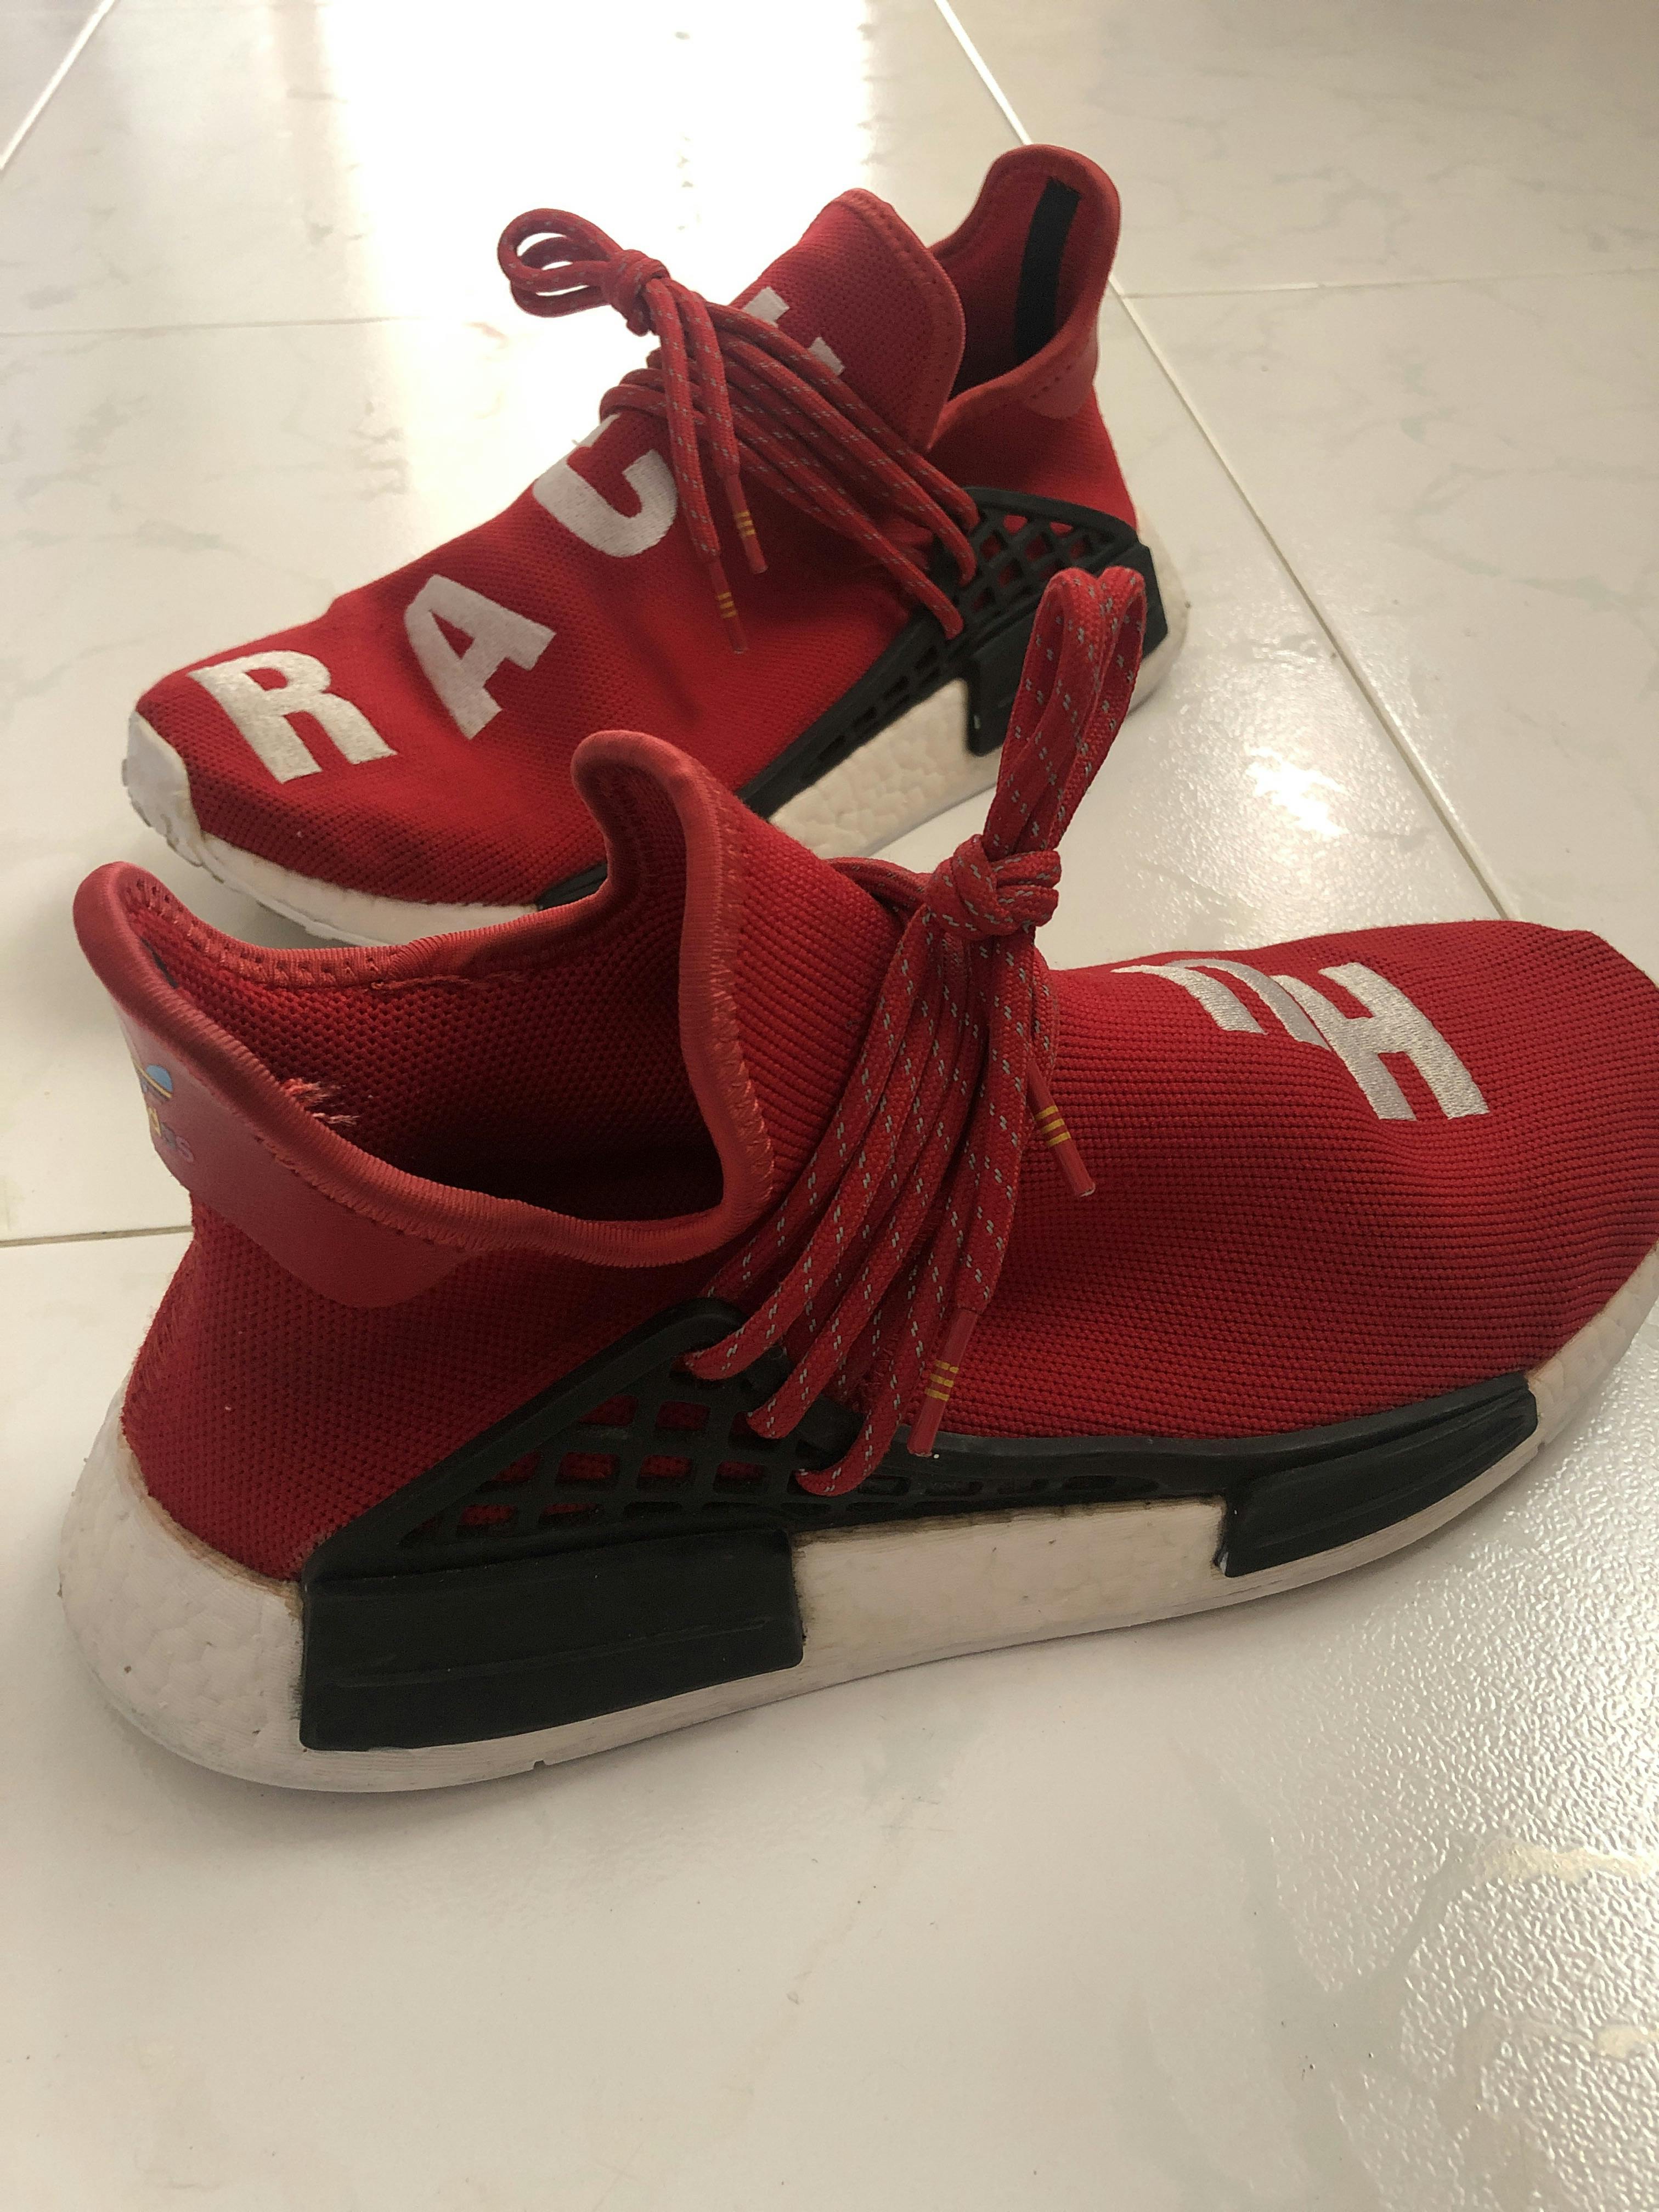 red 500 yeezy